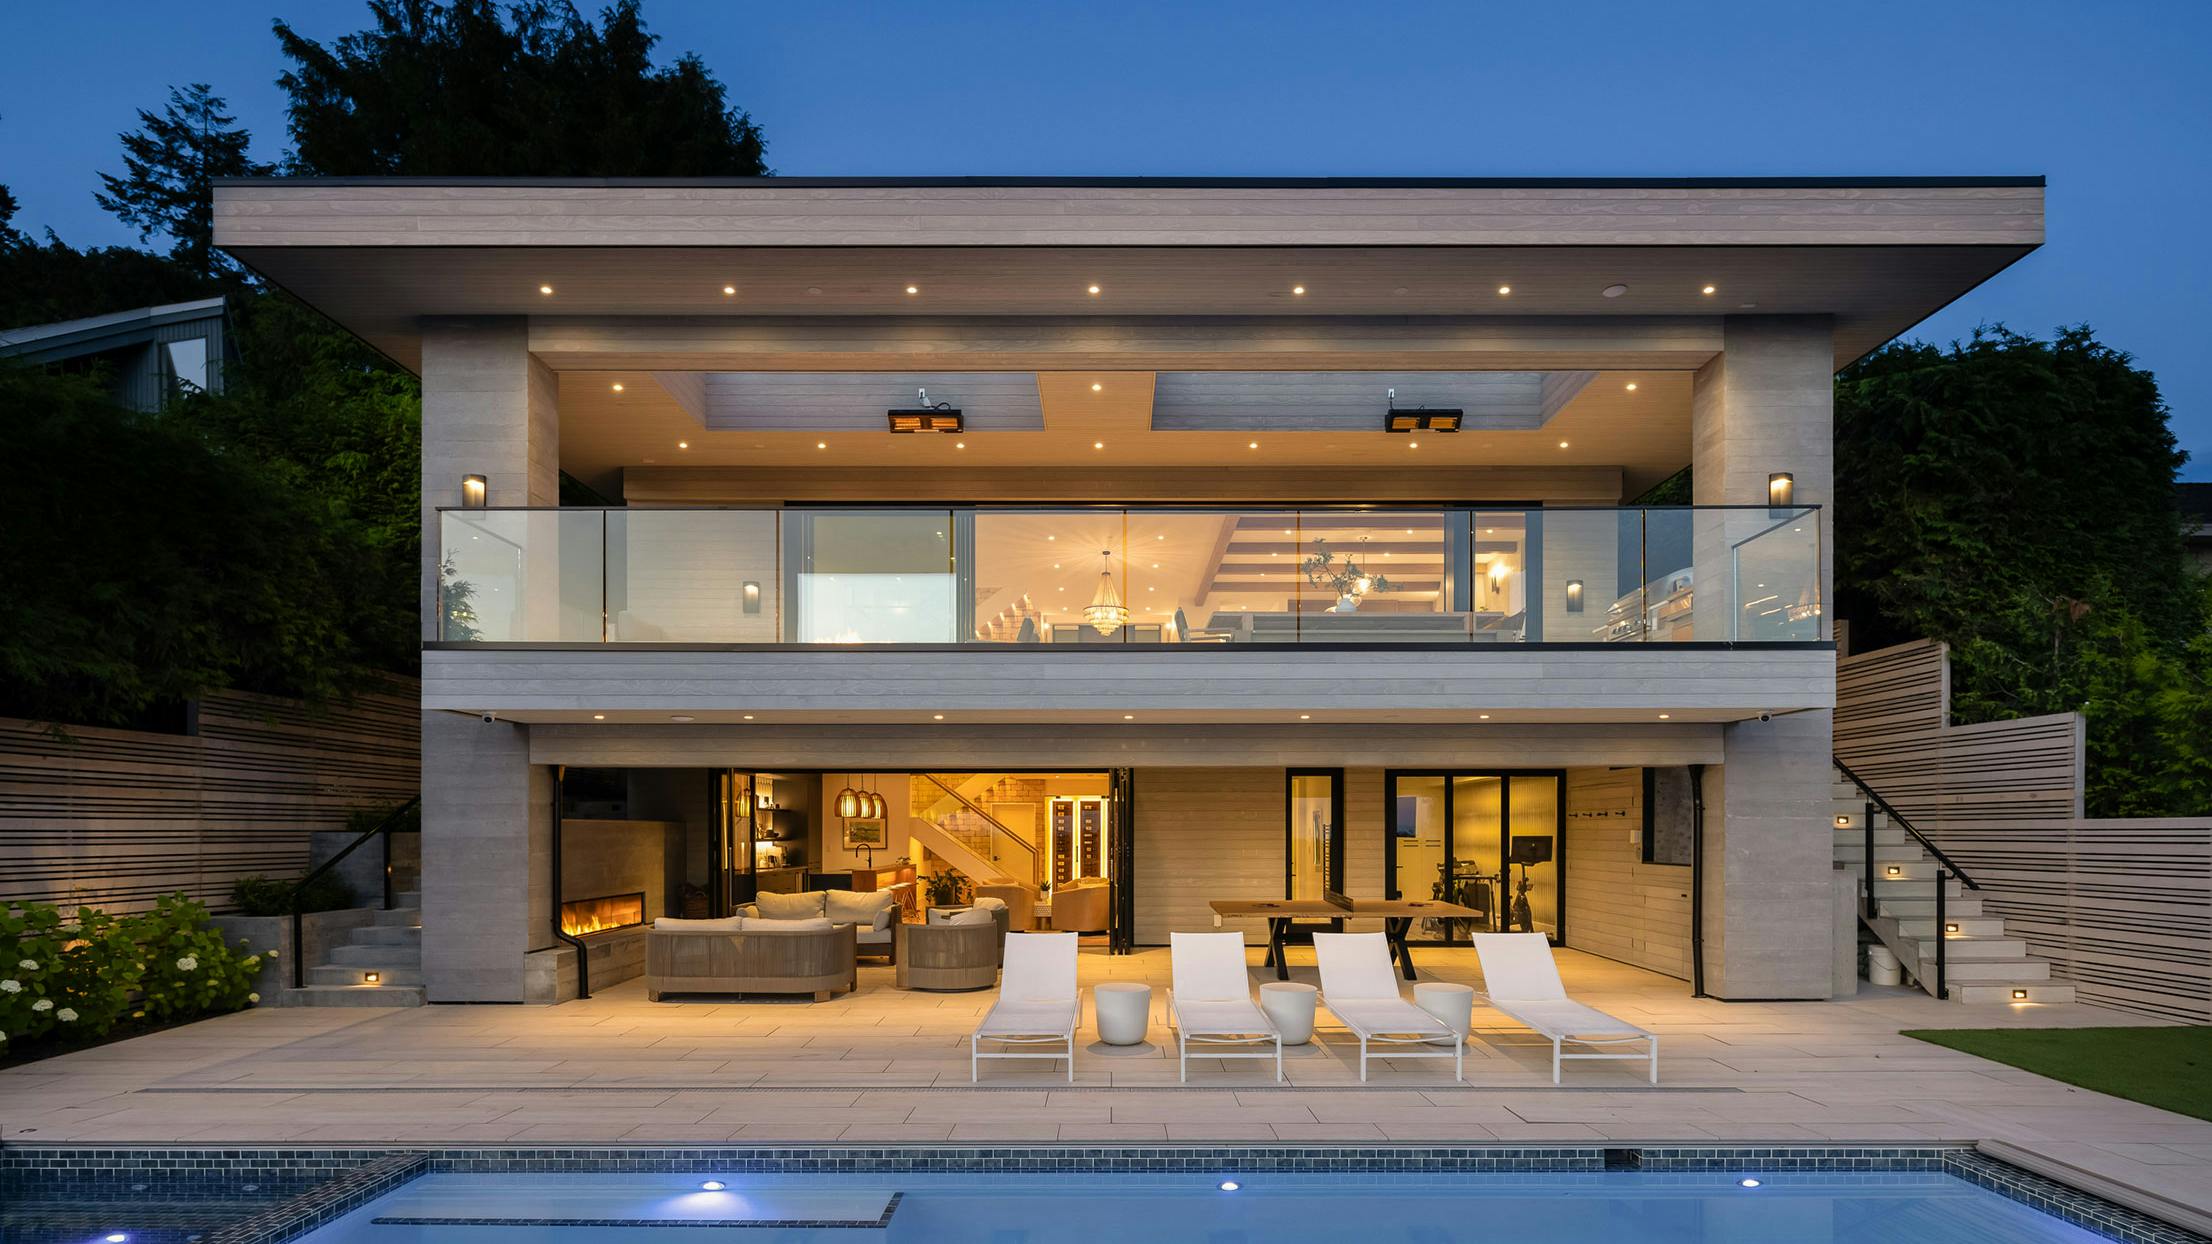 A modern house with minimal glass walls and a swimming pool at dusk